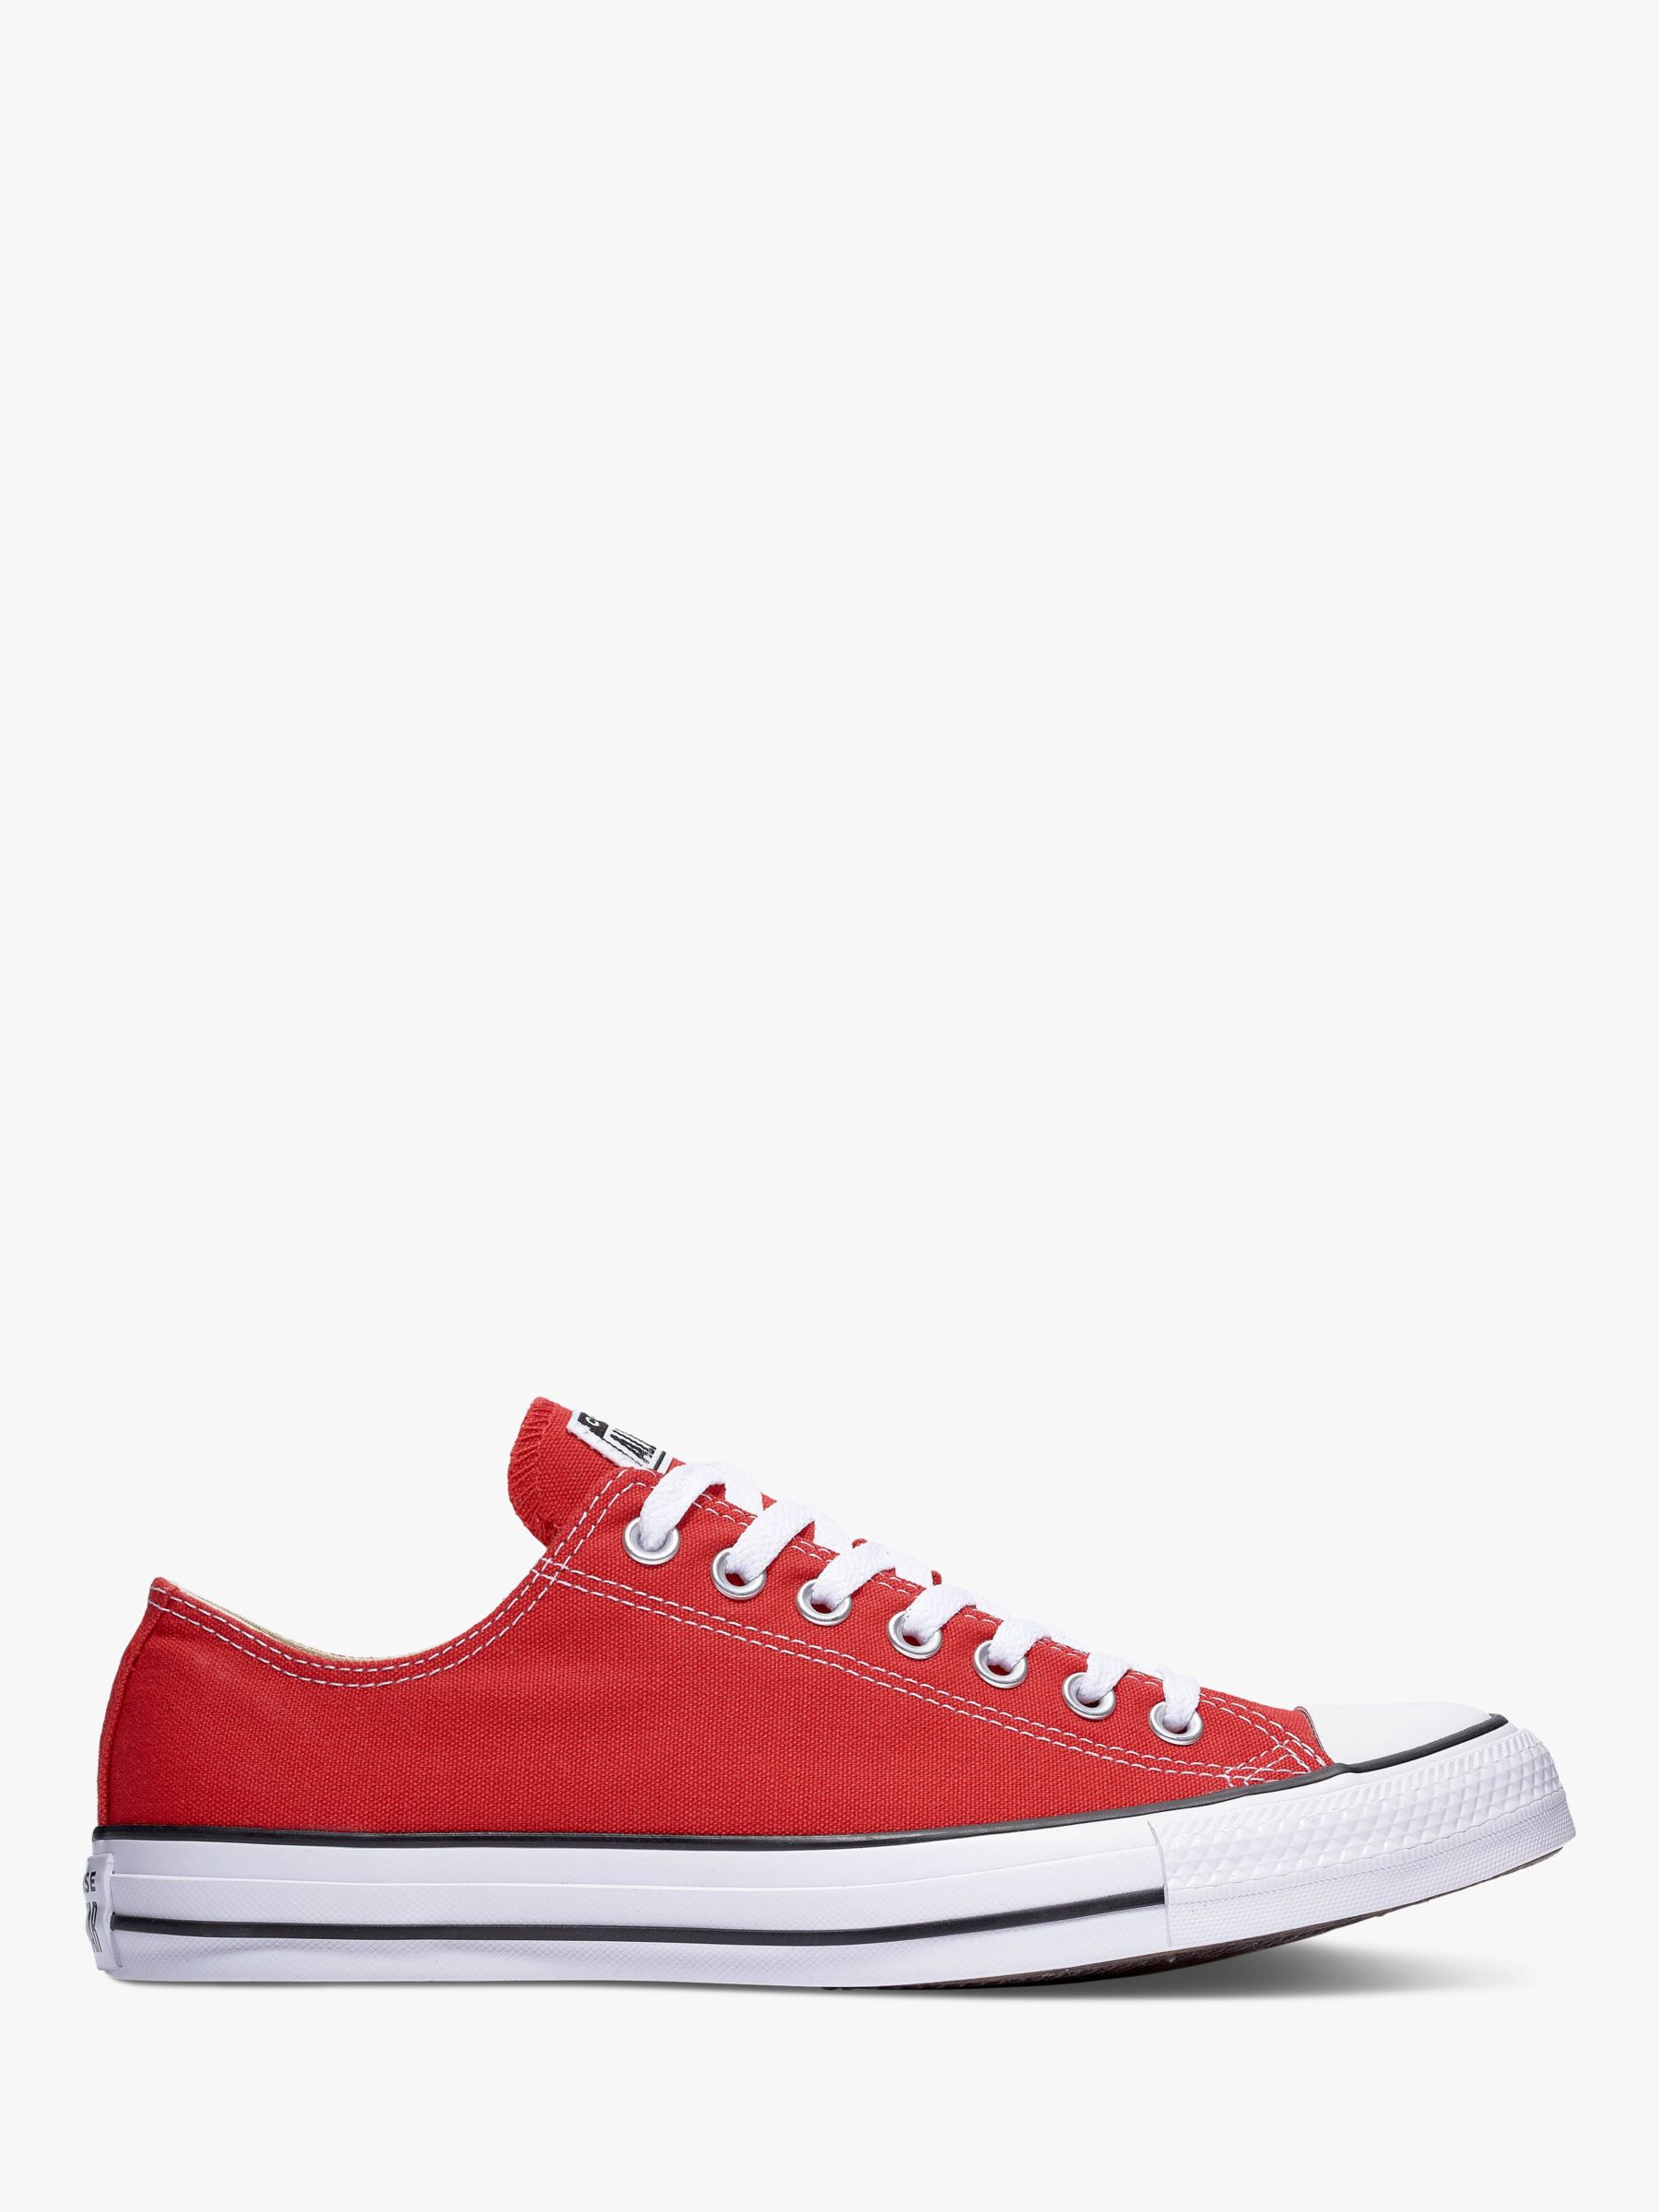 converse chuck taylor all star ox red